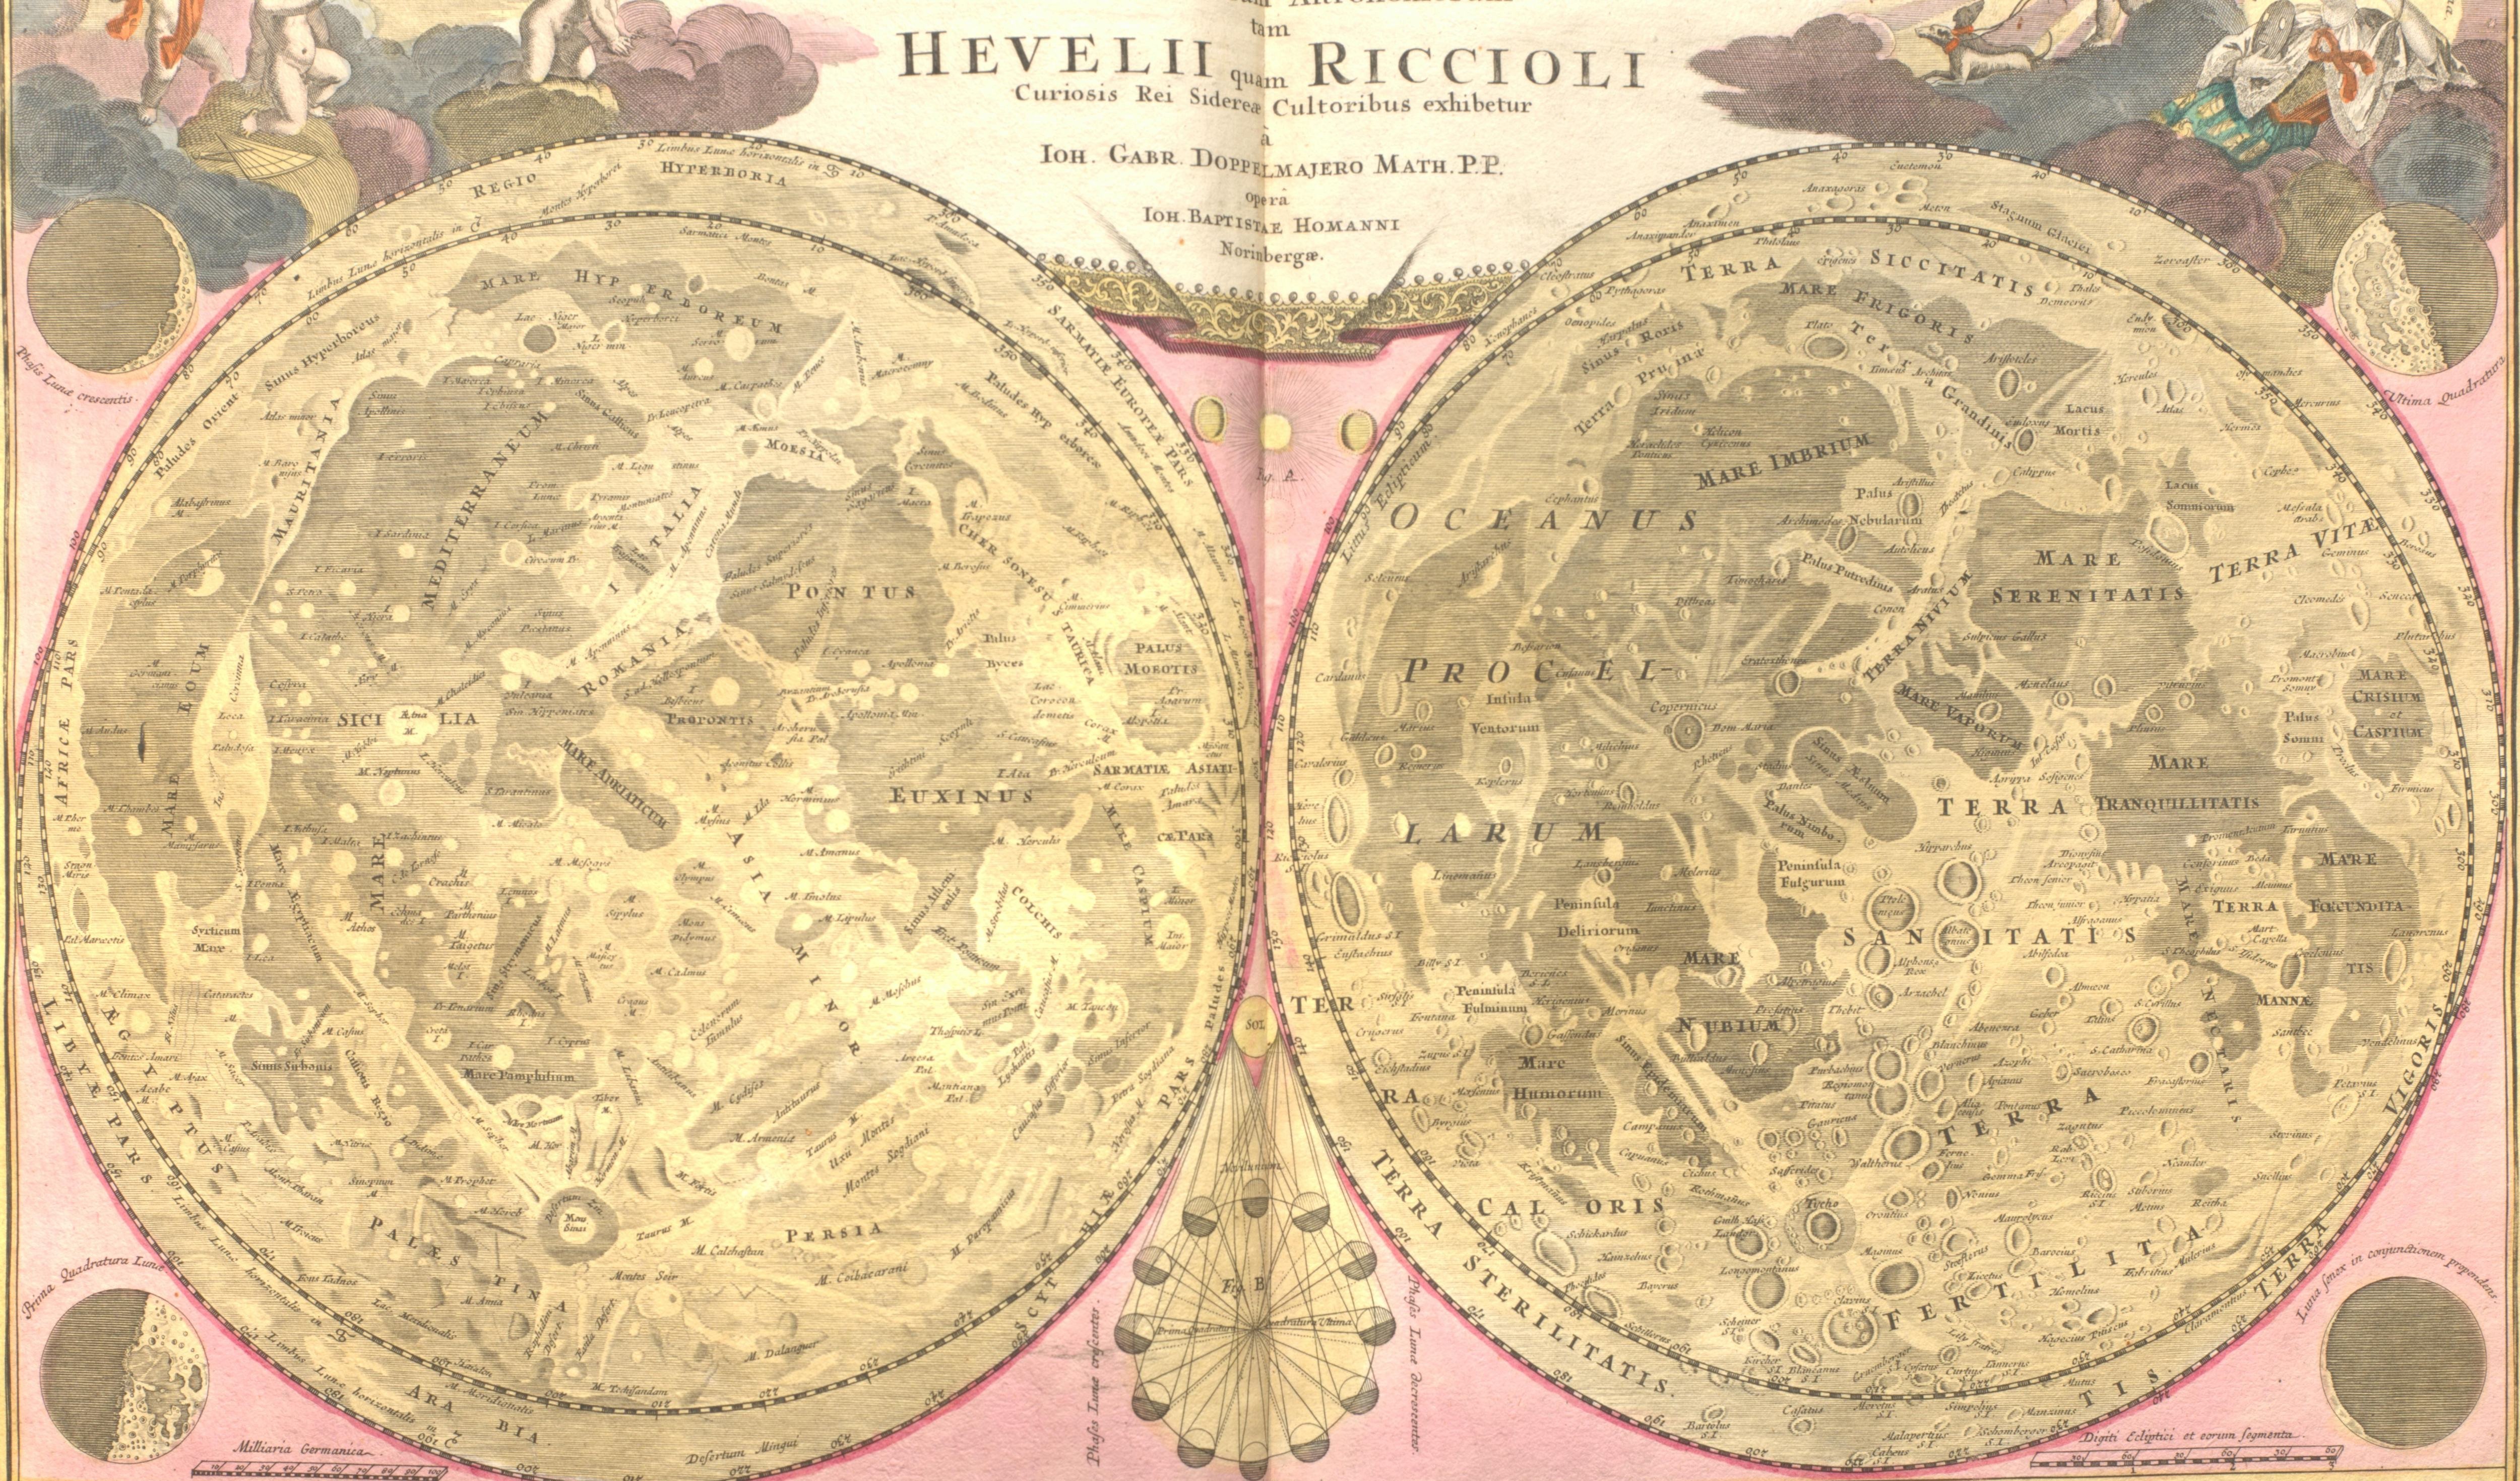 two large sketches of the moon side by side. on the top is Latin text and surrounding the sketches are watercolor-type images